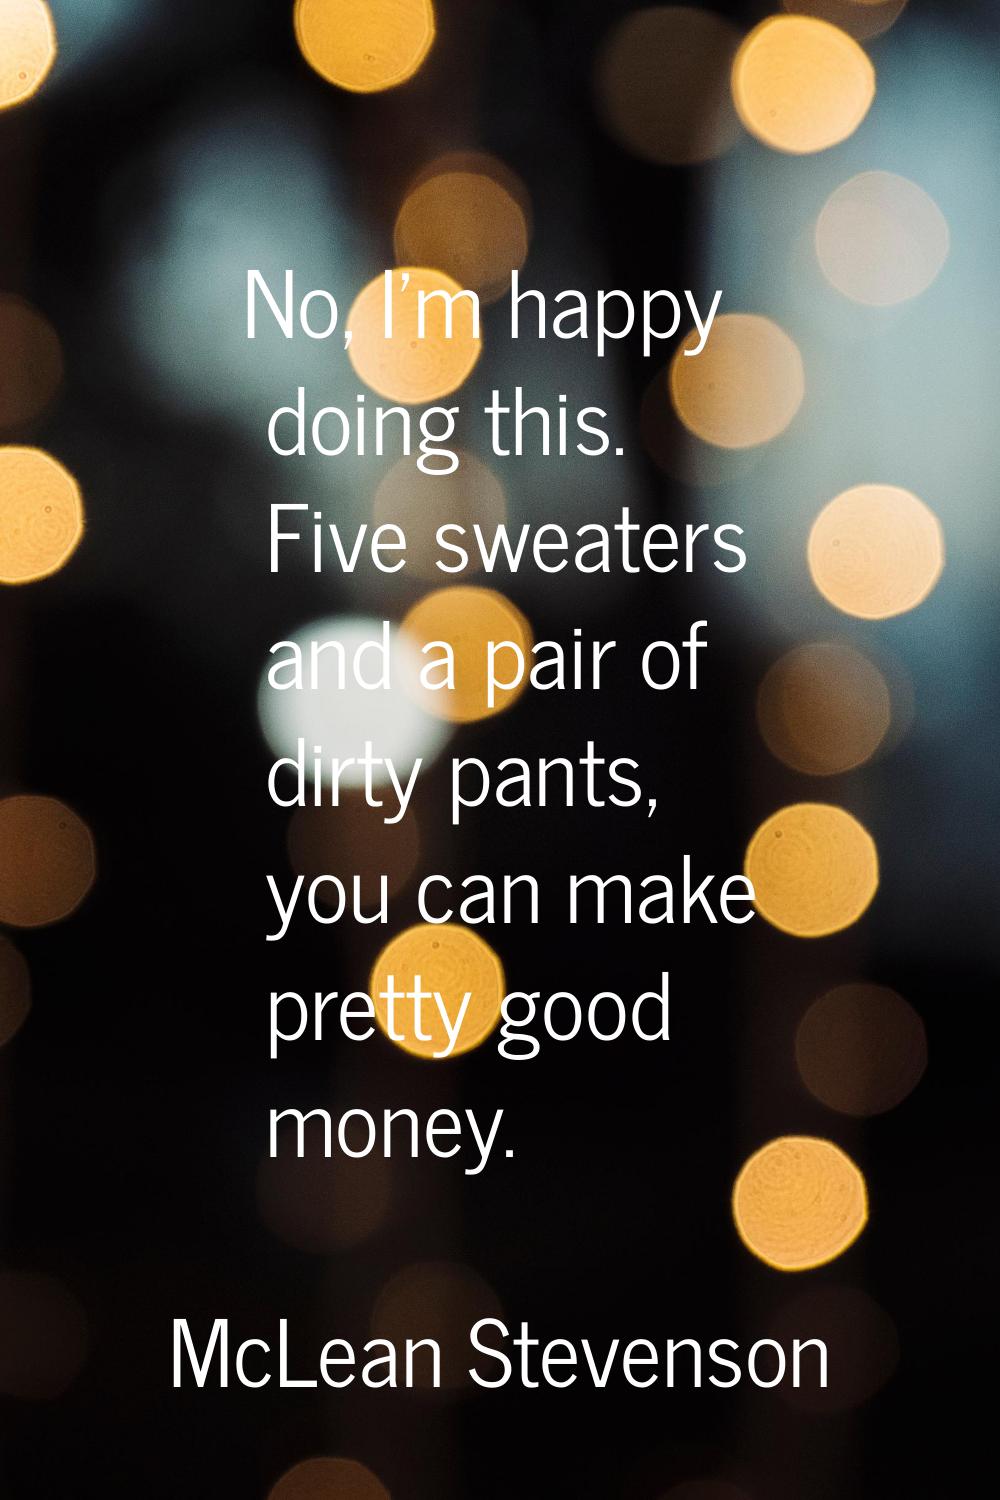 No, I'm happy doing this. Five sweaters and a pair of dirty pants, you can make pretty good money.